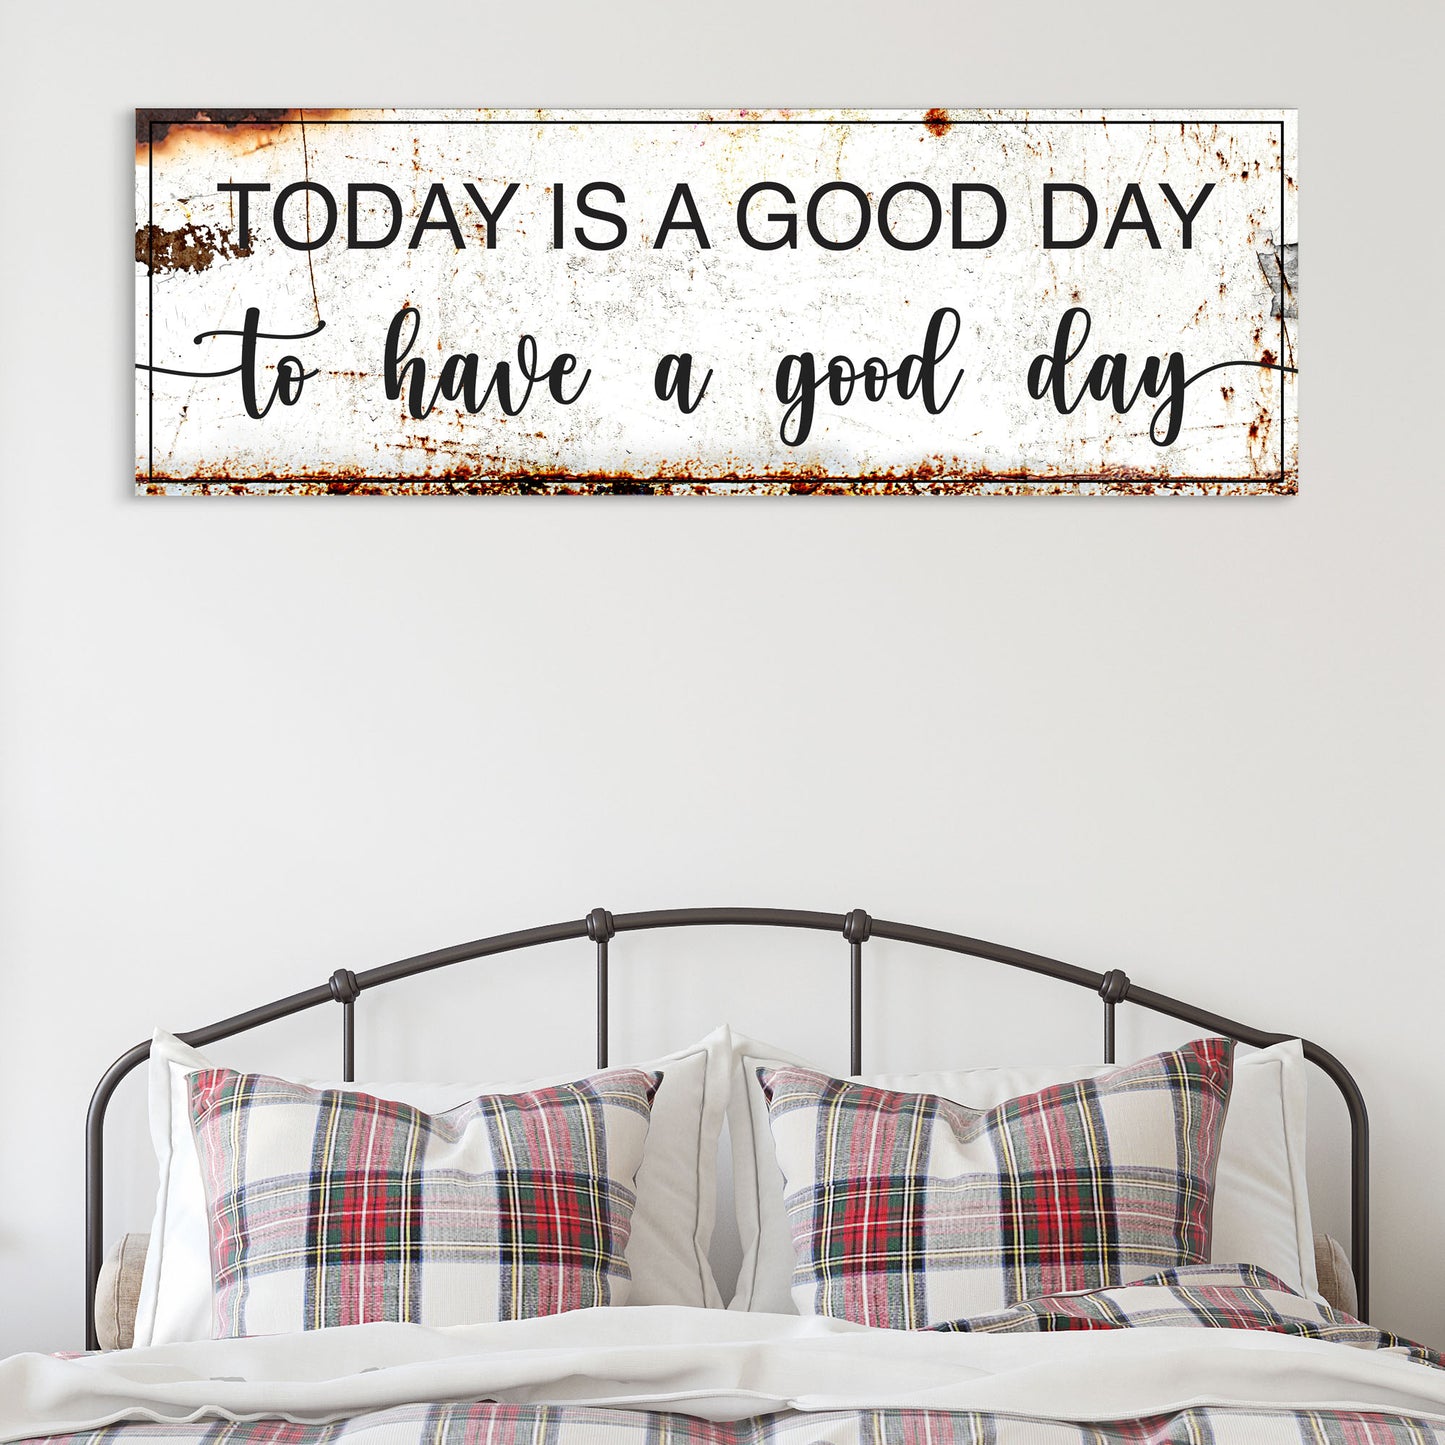 Today is a Good Day Sign II - Image by Tailored Canvases